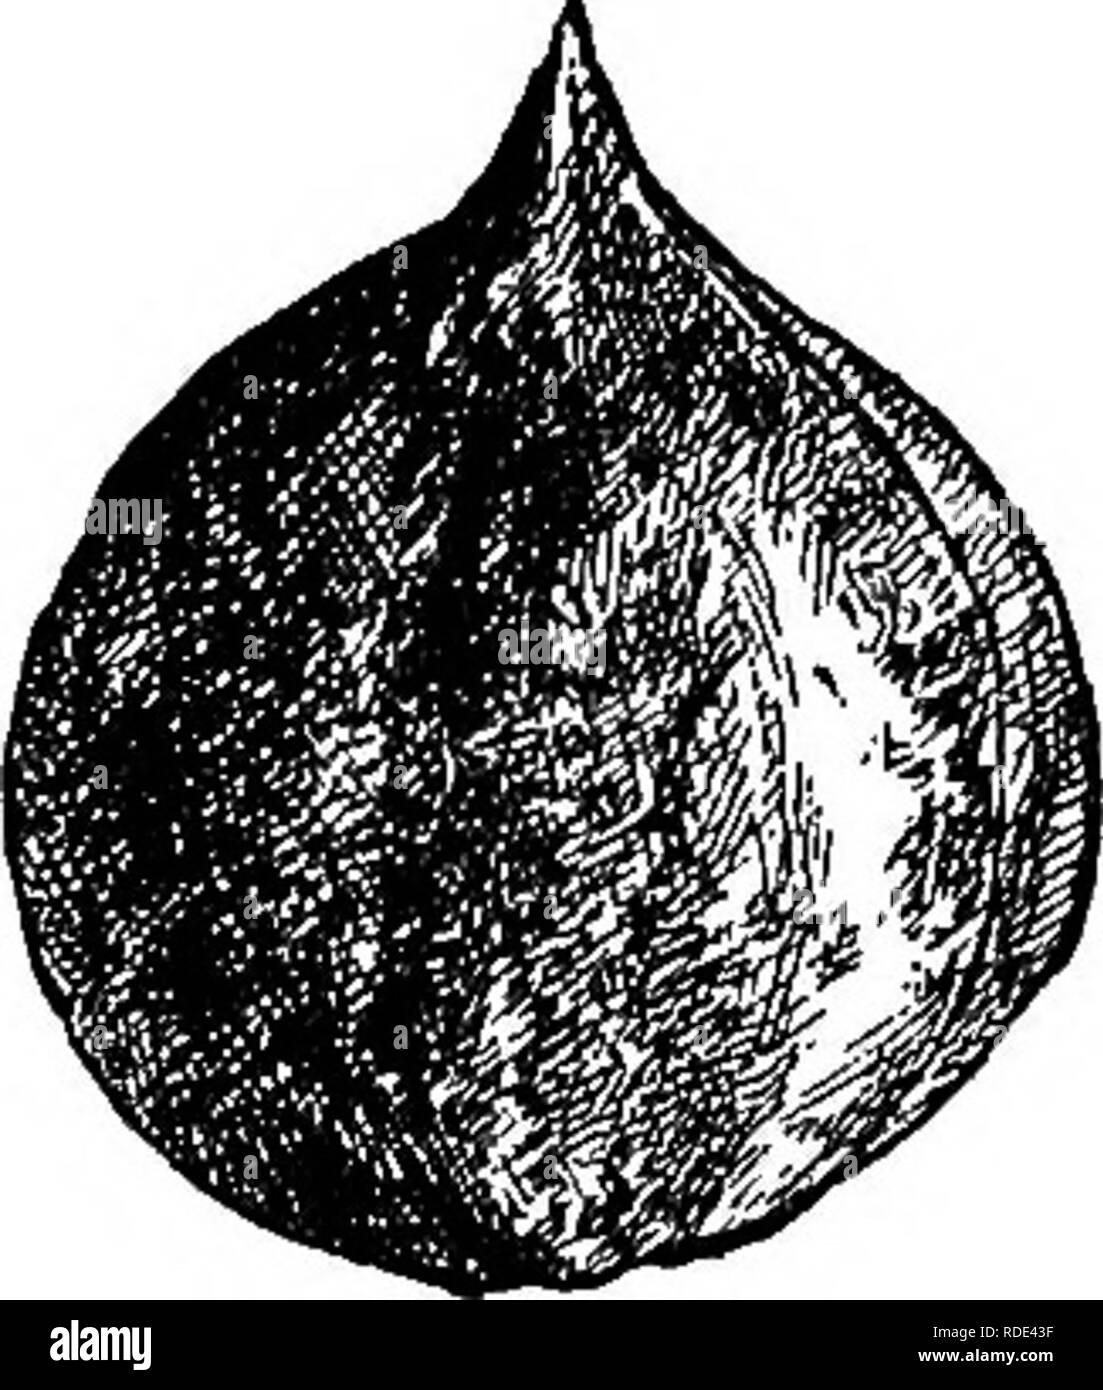 . The American fruit culturist, containing directions for the propagation and culture of all fruits adapted to the United States. Fruit-culture. Fig. 612.—Juglans Corditormis. Mayette.* Large, oblong, oily, good ; nuts grow in pairs; shell hard ; blooms late. Suited for frosty places. France. Fig. 620. Parisienne. Large, oblong, excellent: good table nut. Fig. 6i6. Praeparturiens.* A famous French variety, introduced into Cali- fornia in 1871, now widely distributed. Its chief merits are early bearing and high quality. Fig. 617. St. Jean. Medium, roundish; hard shell; meat oily. Cultivated chi Stock Photo